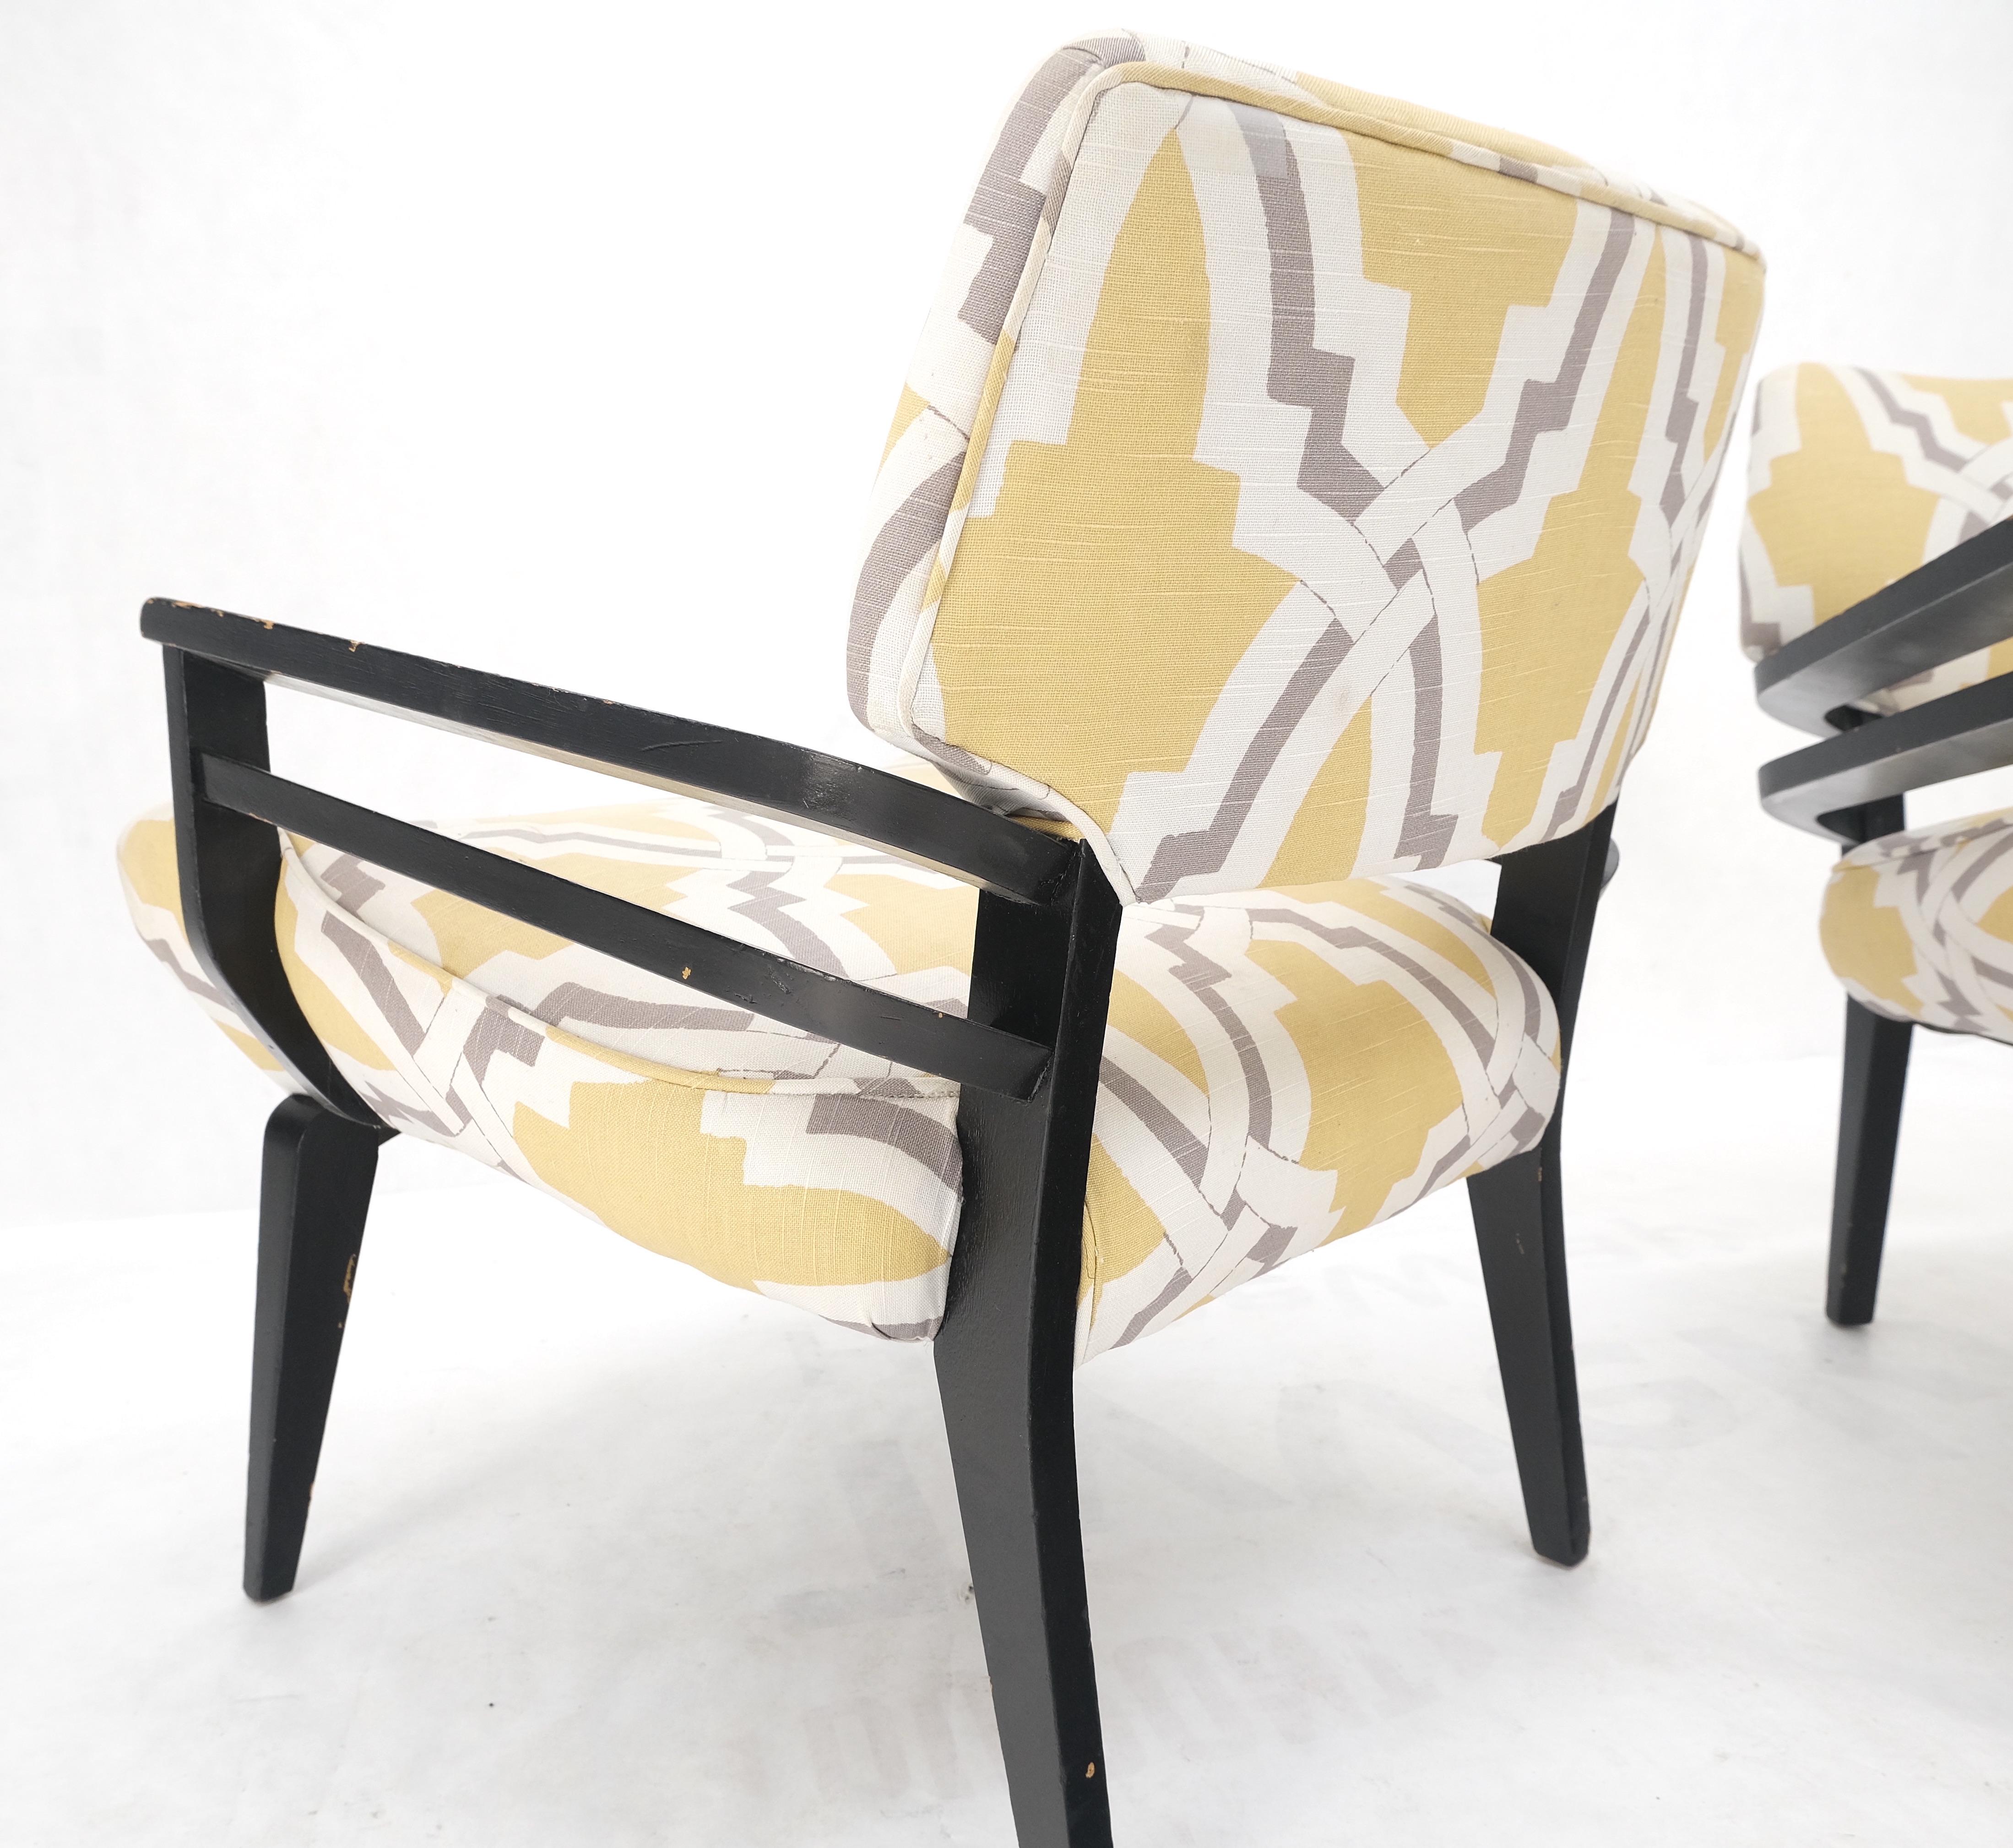 Pair of Mid-Century Modern Black Lacquer Abstract Fabric Lounge Chairs AS IS In Good Condition For Sale In Rockaway, NJ